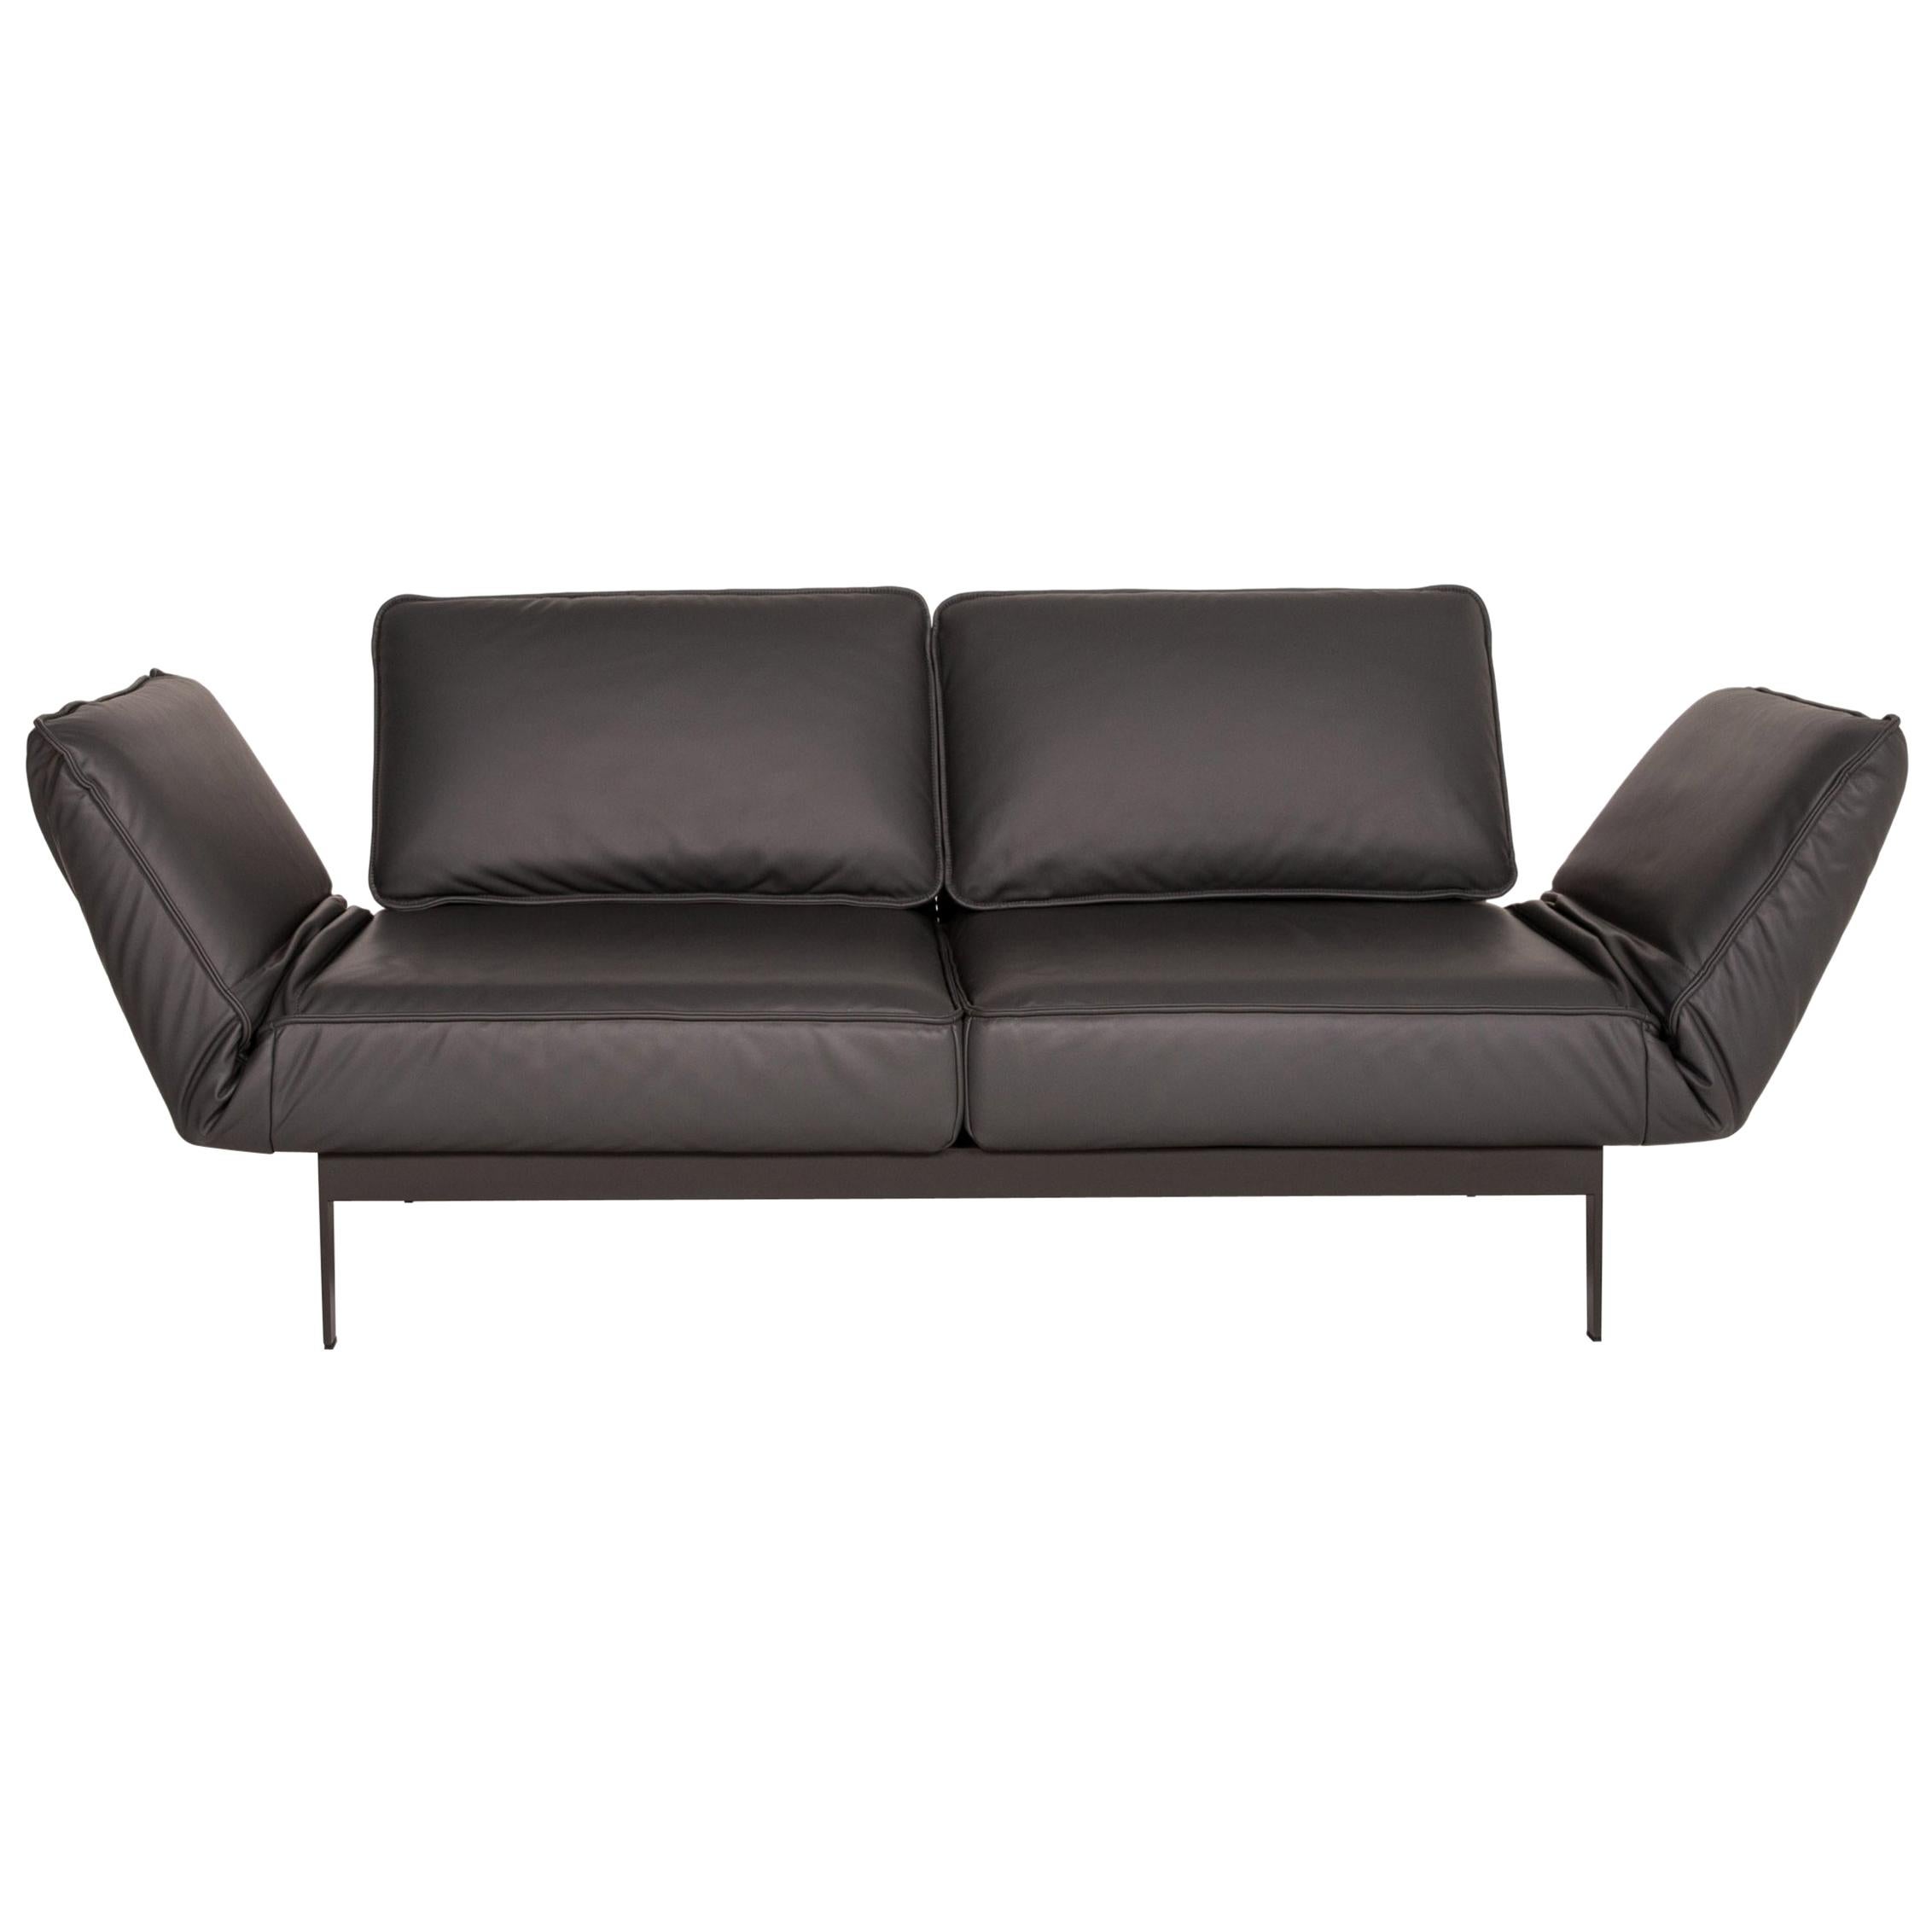 Rolf Benz Mera Leather Sofa Gray Dark Gray Two-Seater Function Relax Function